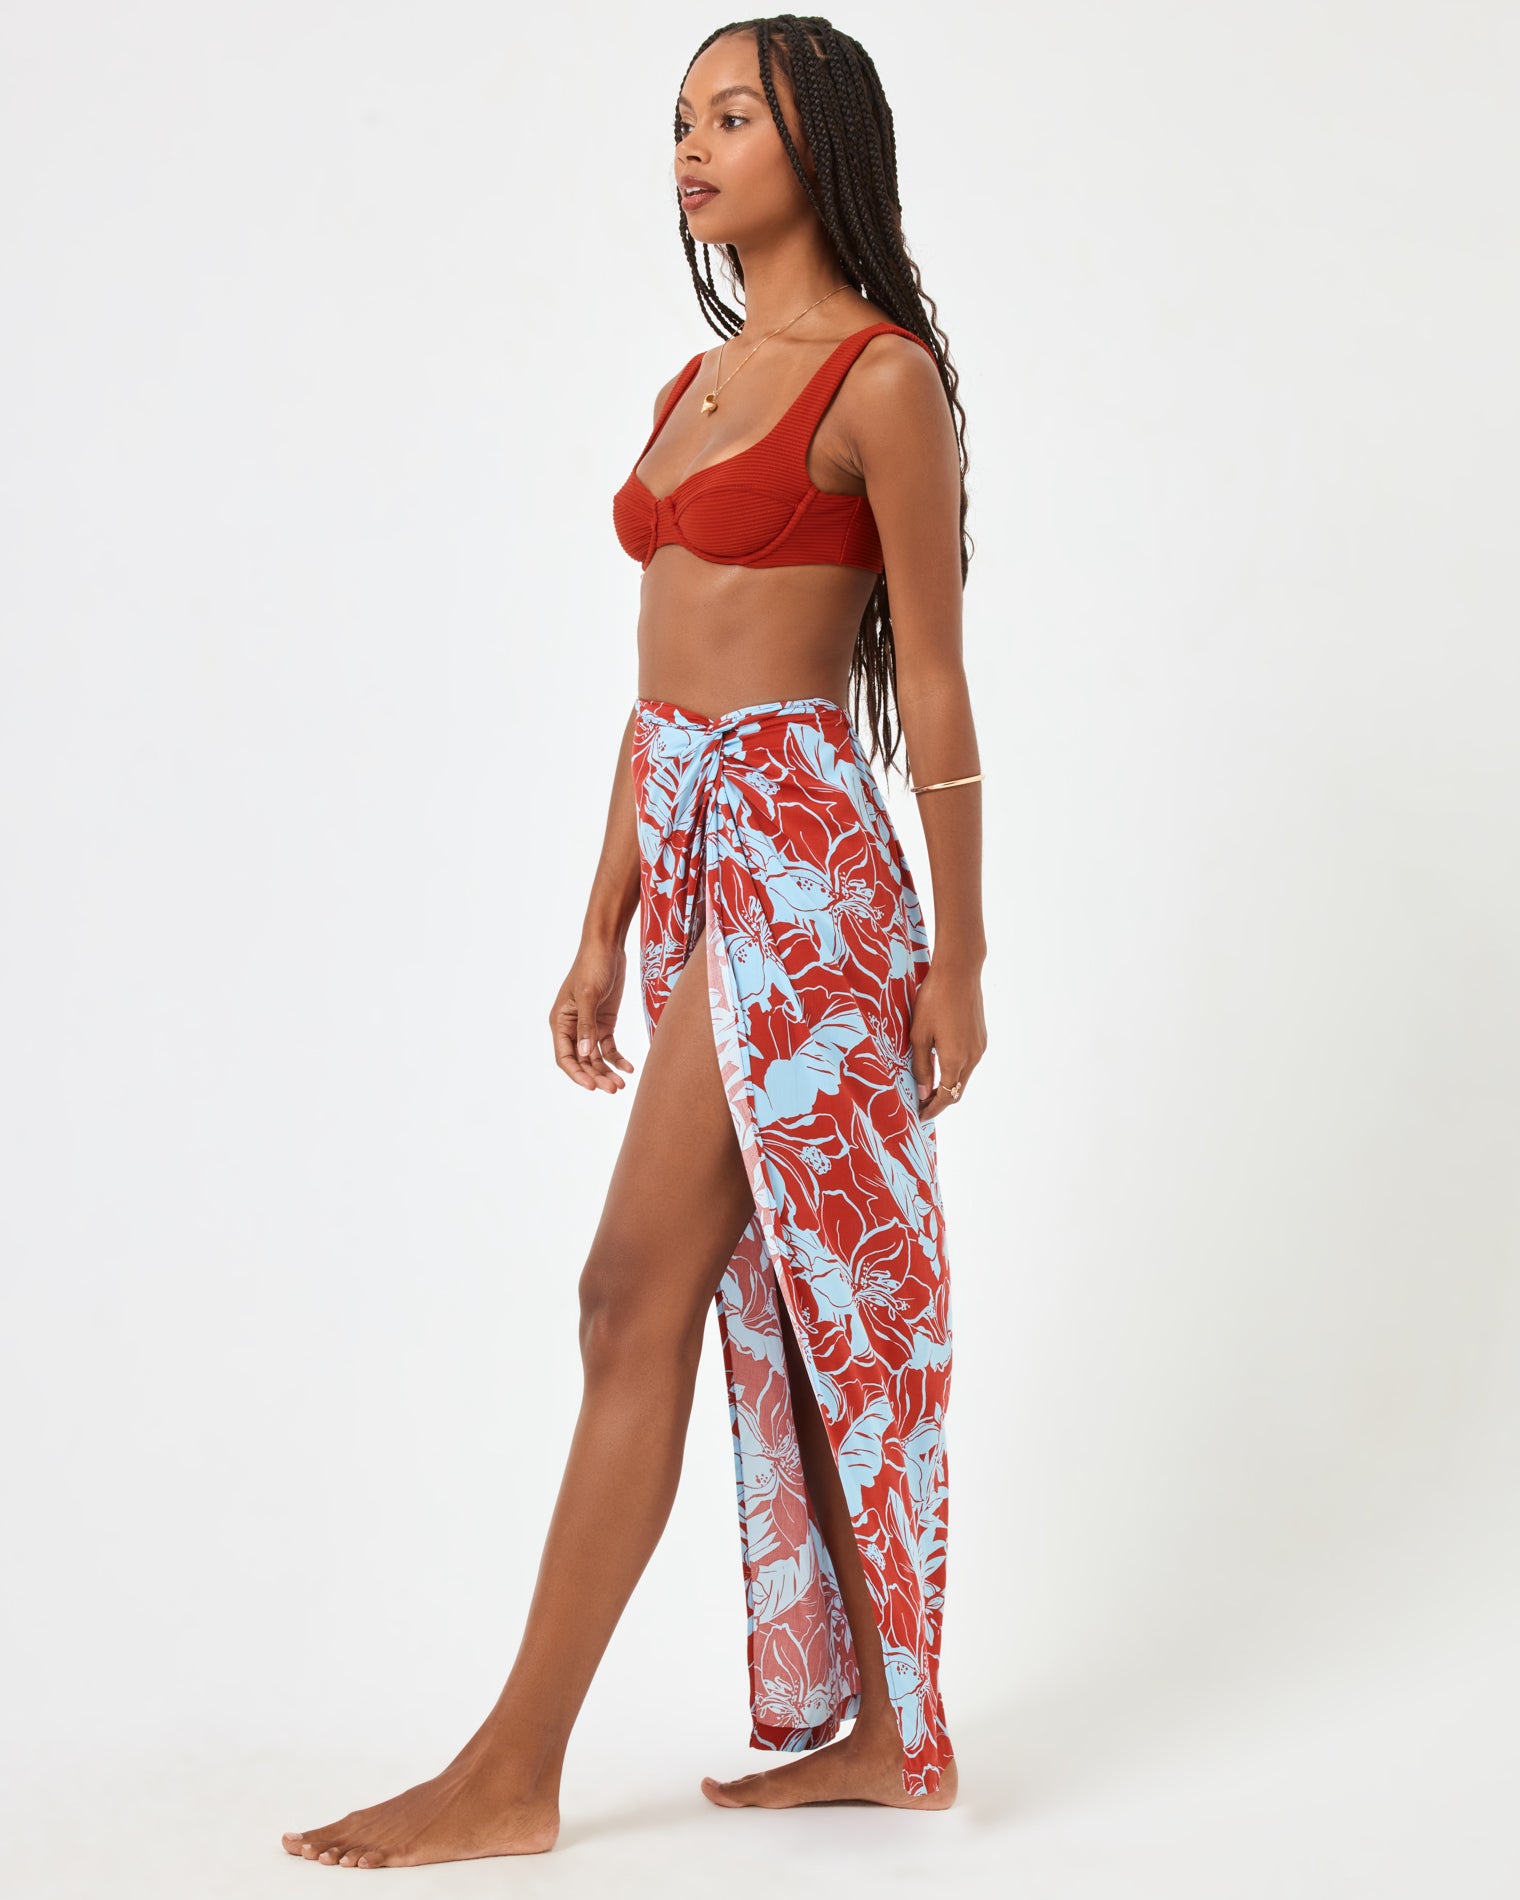 Printed Mia Cover-Up - Going Tropical Going Tropical | Model: Taelor (size: S) | Hover